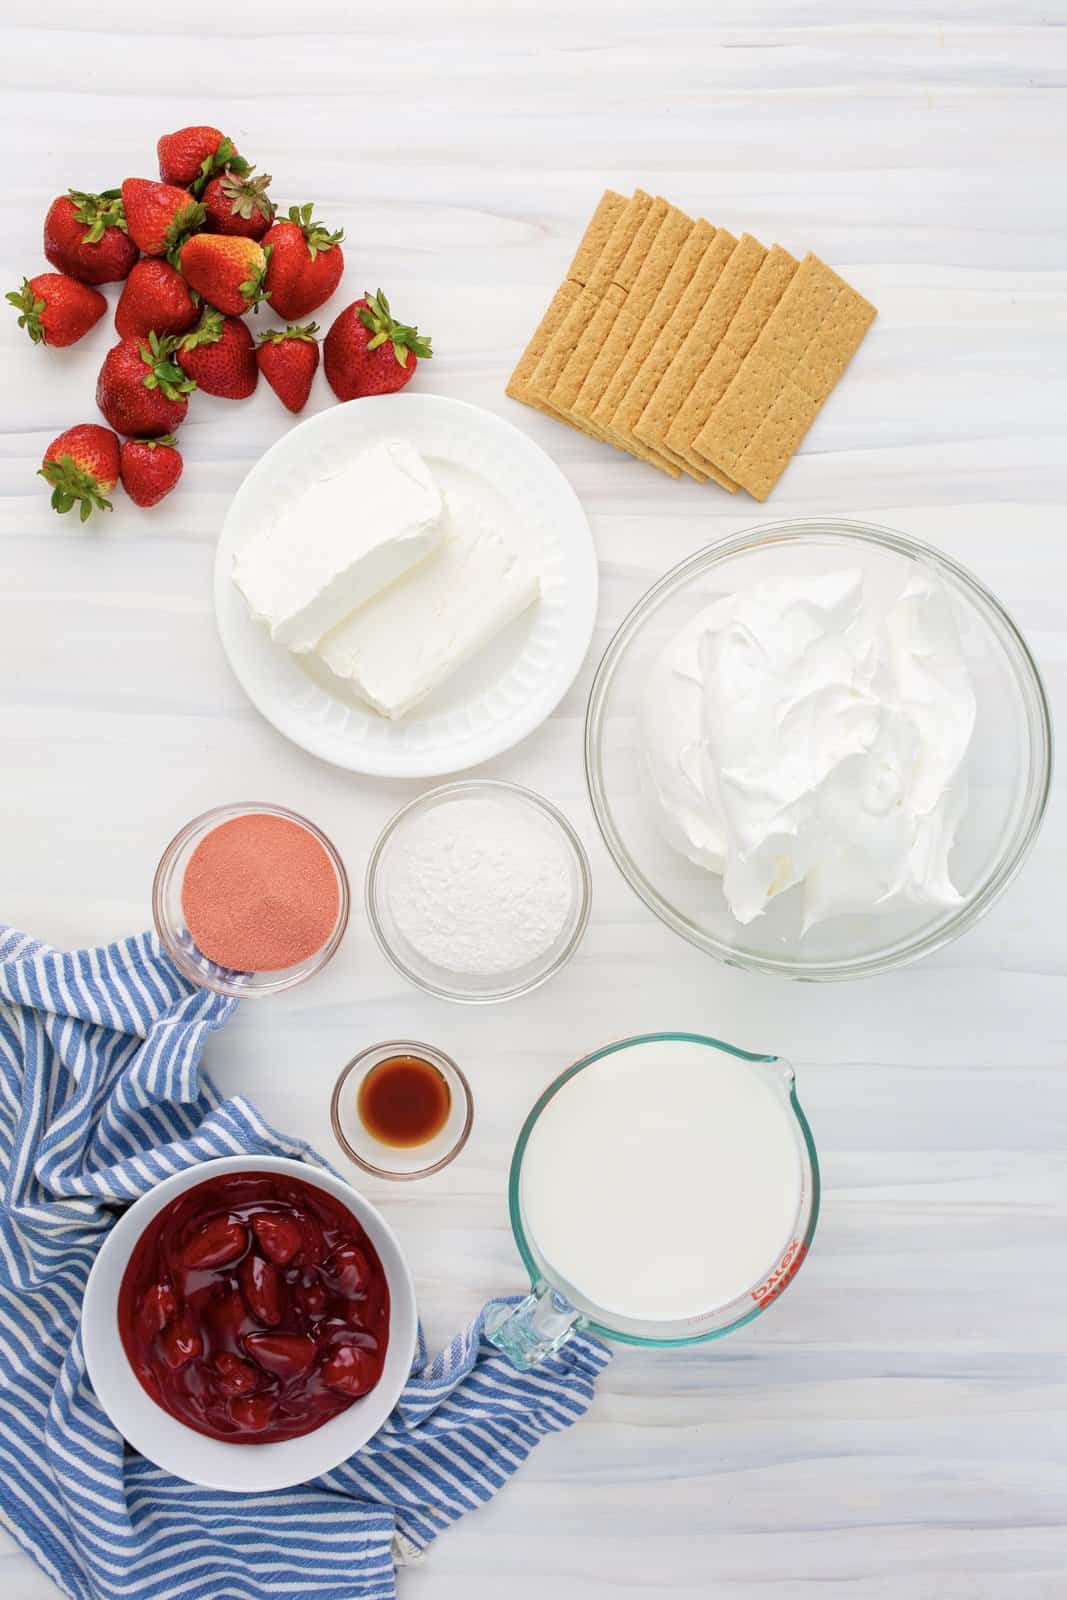 Ingredients needed: cream cheese, instant cheesecake jello pudding, strawberry jello, strawberries, cool whip, milk, vanilla extract, graham crackers and strawberry pie filling, optional.